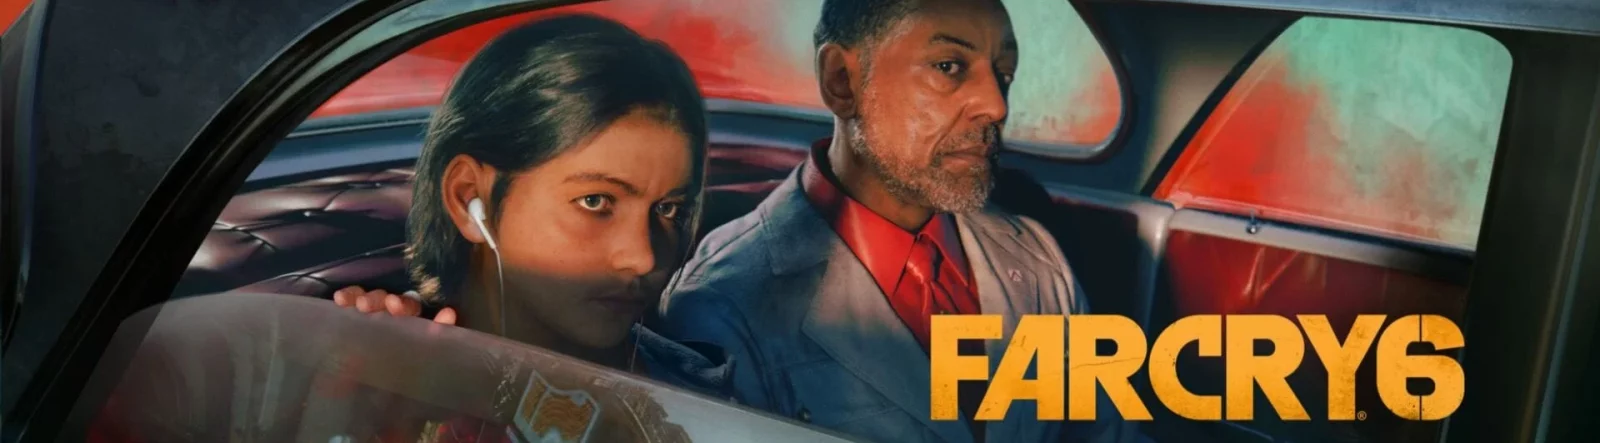 Far Cry 6 Xbox Game Pass Ad Was A Mistake, Confirms Ubisoft